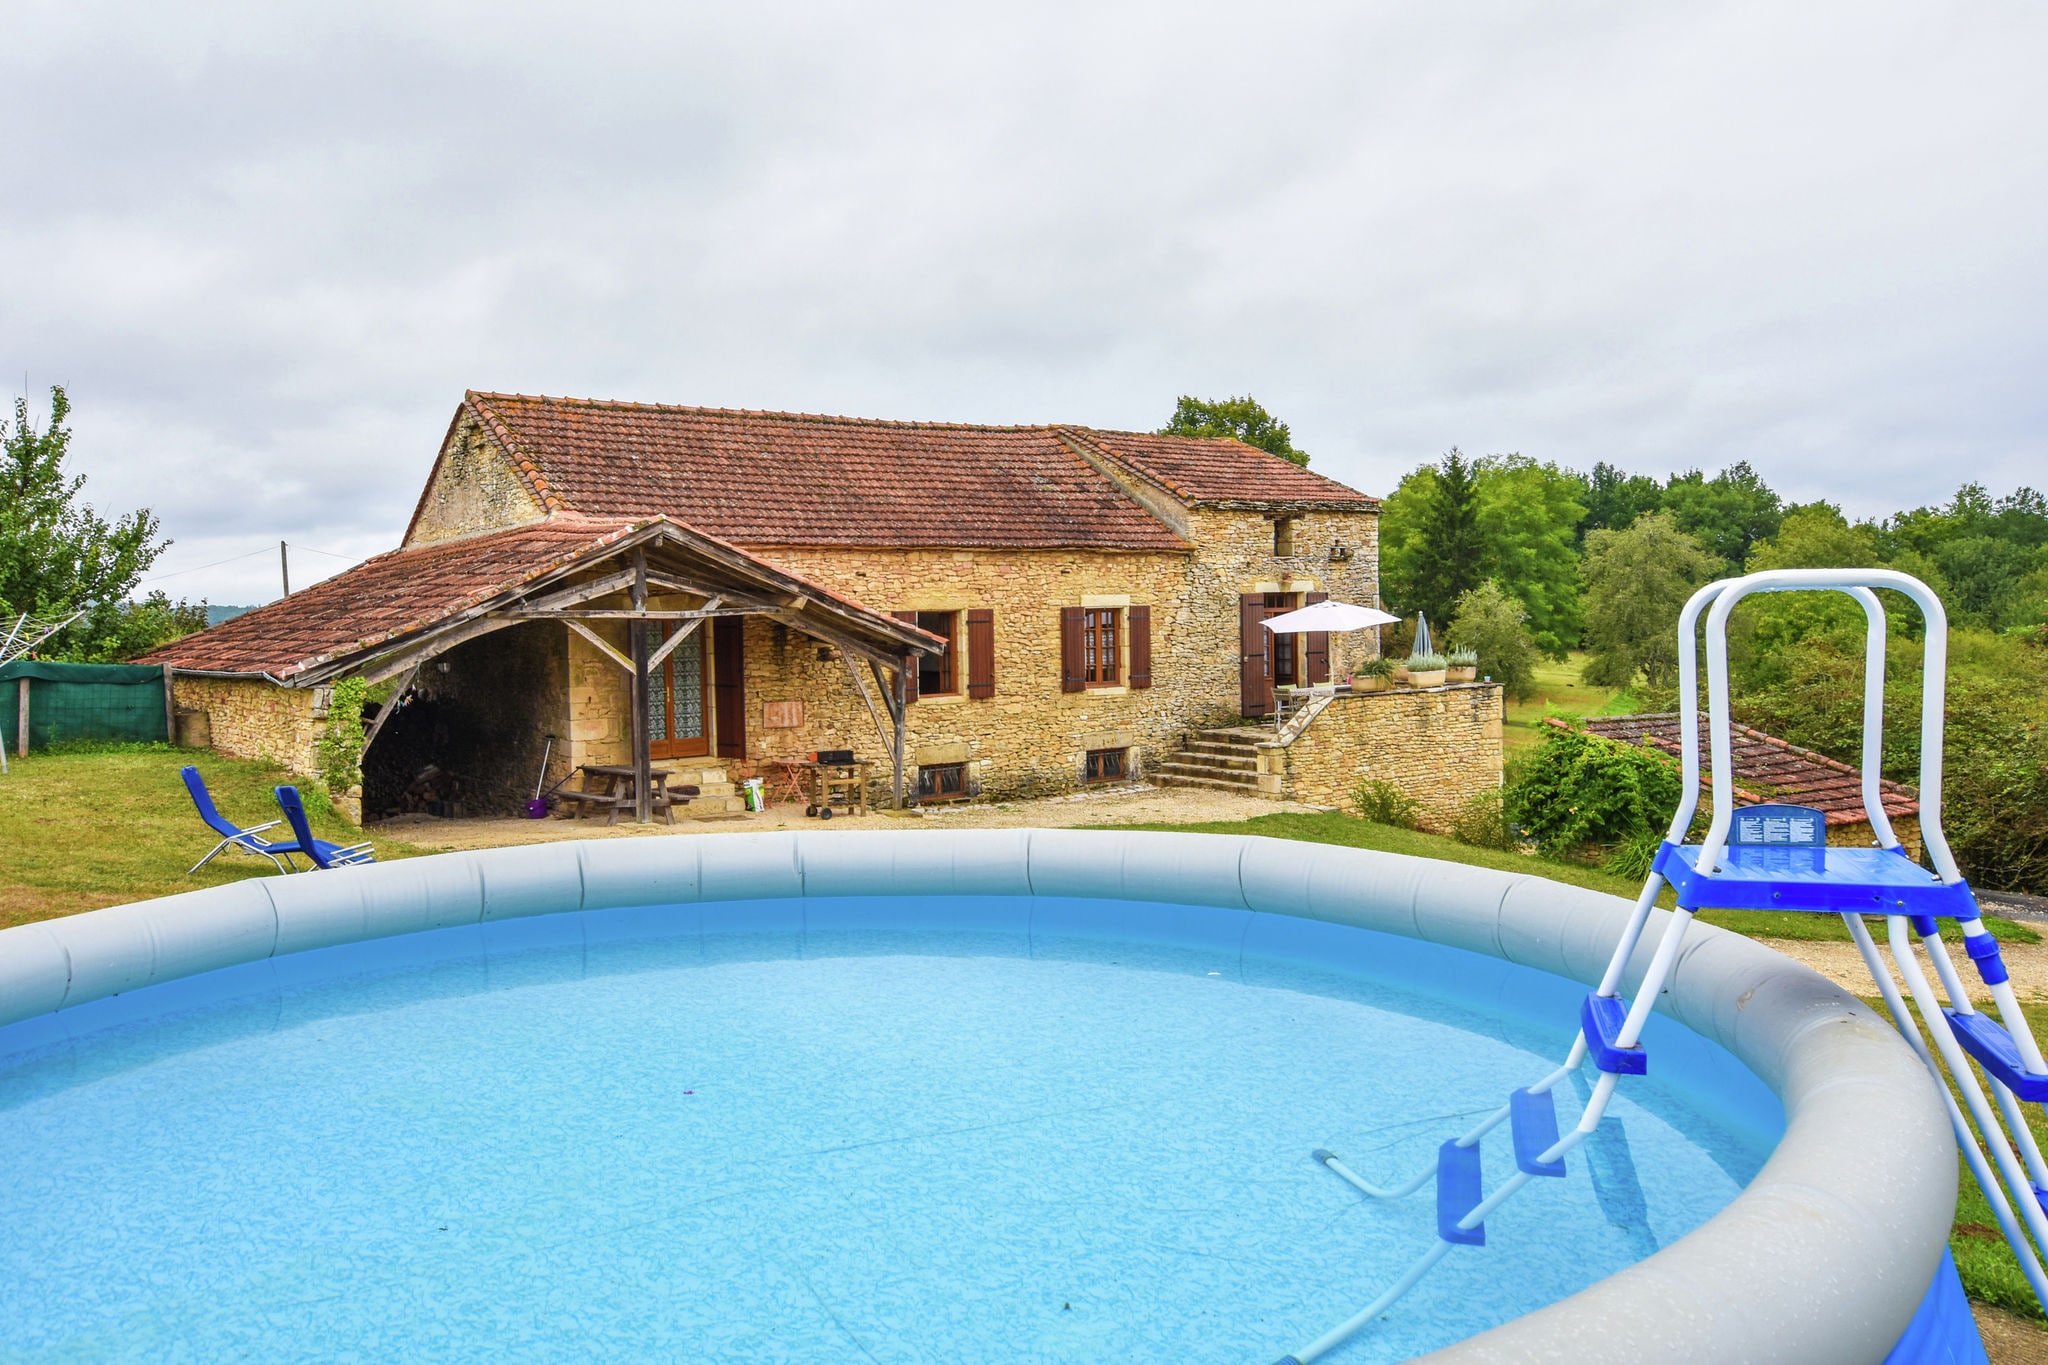 Heavenly holiday home with swimming pool and large garden.